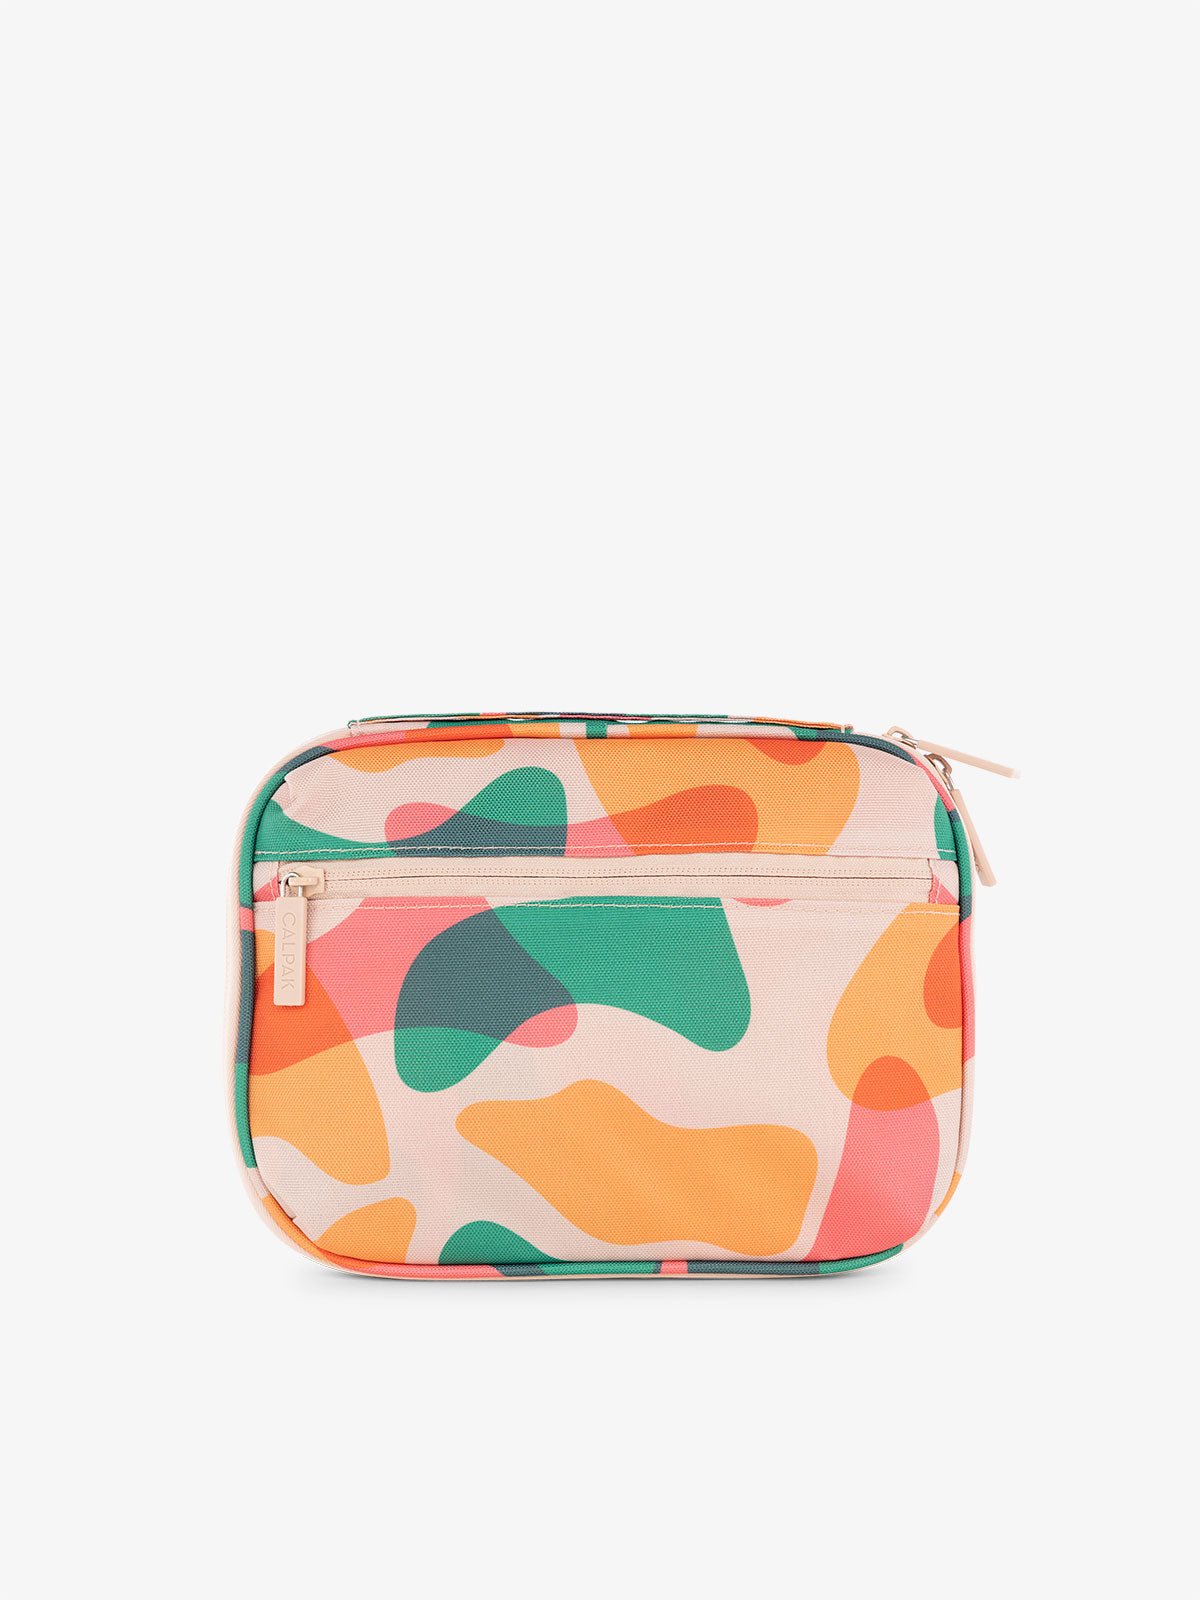 CALPAK tech and cables organizer bag in pink, green abstract print